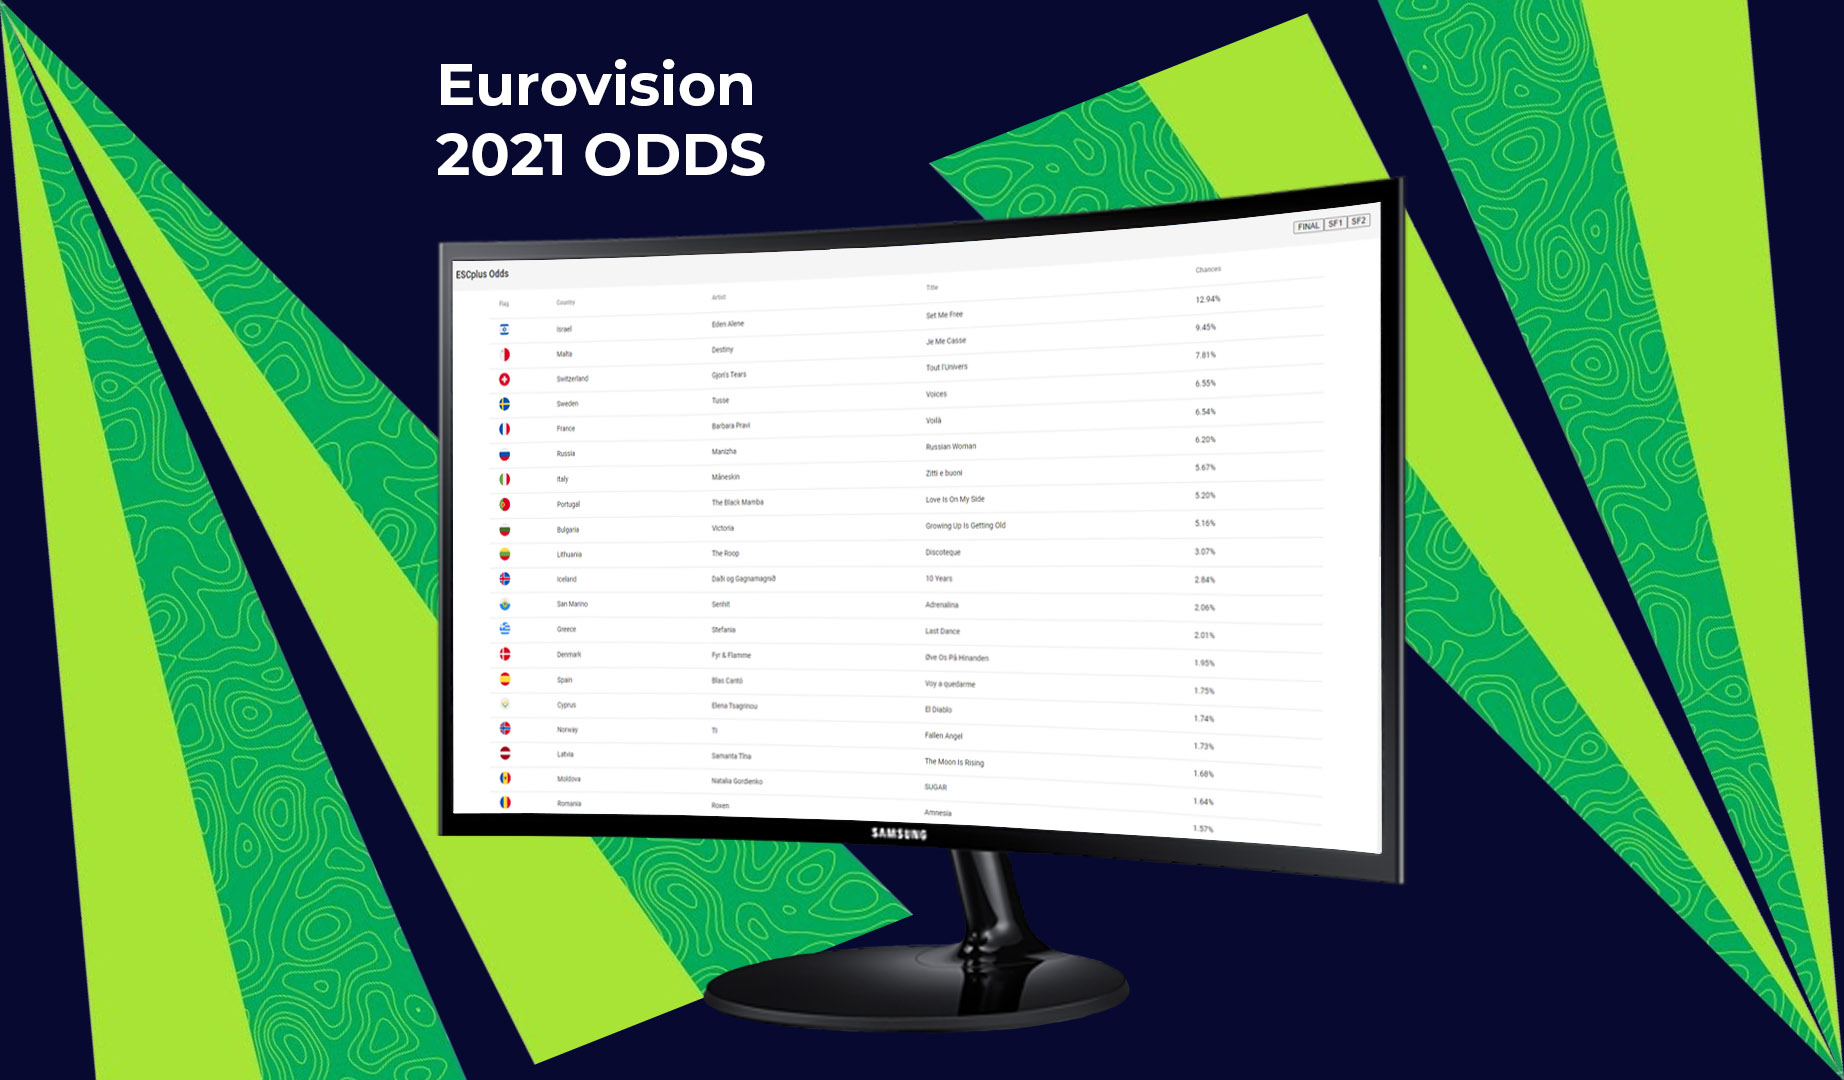 ESCPlus Odds: Launch of real-time 2021 predictions